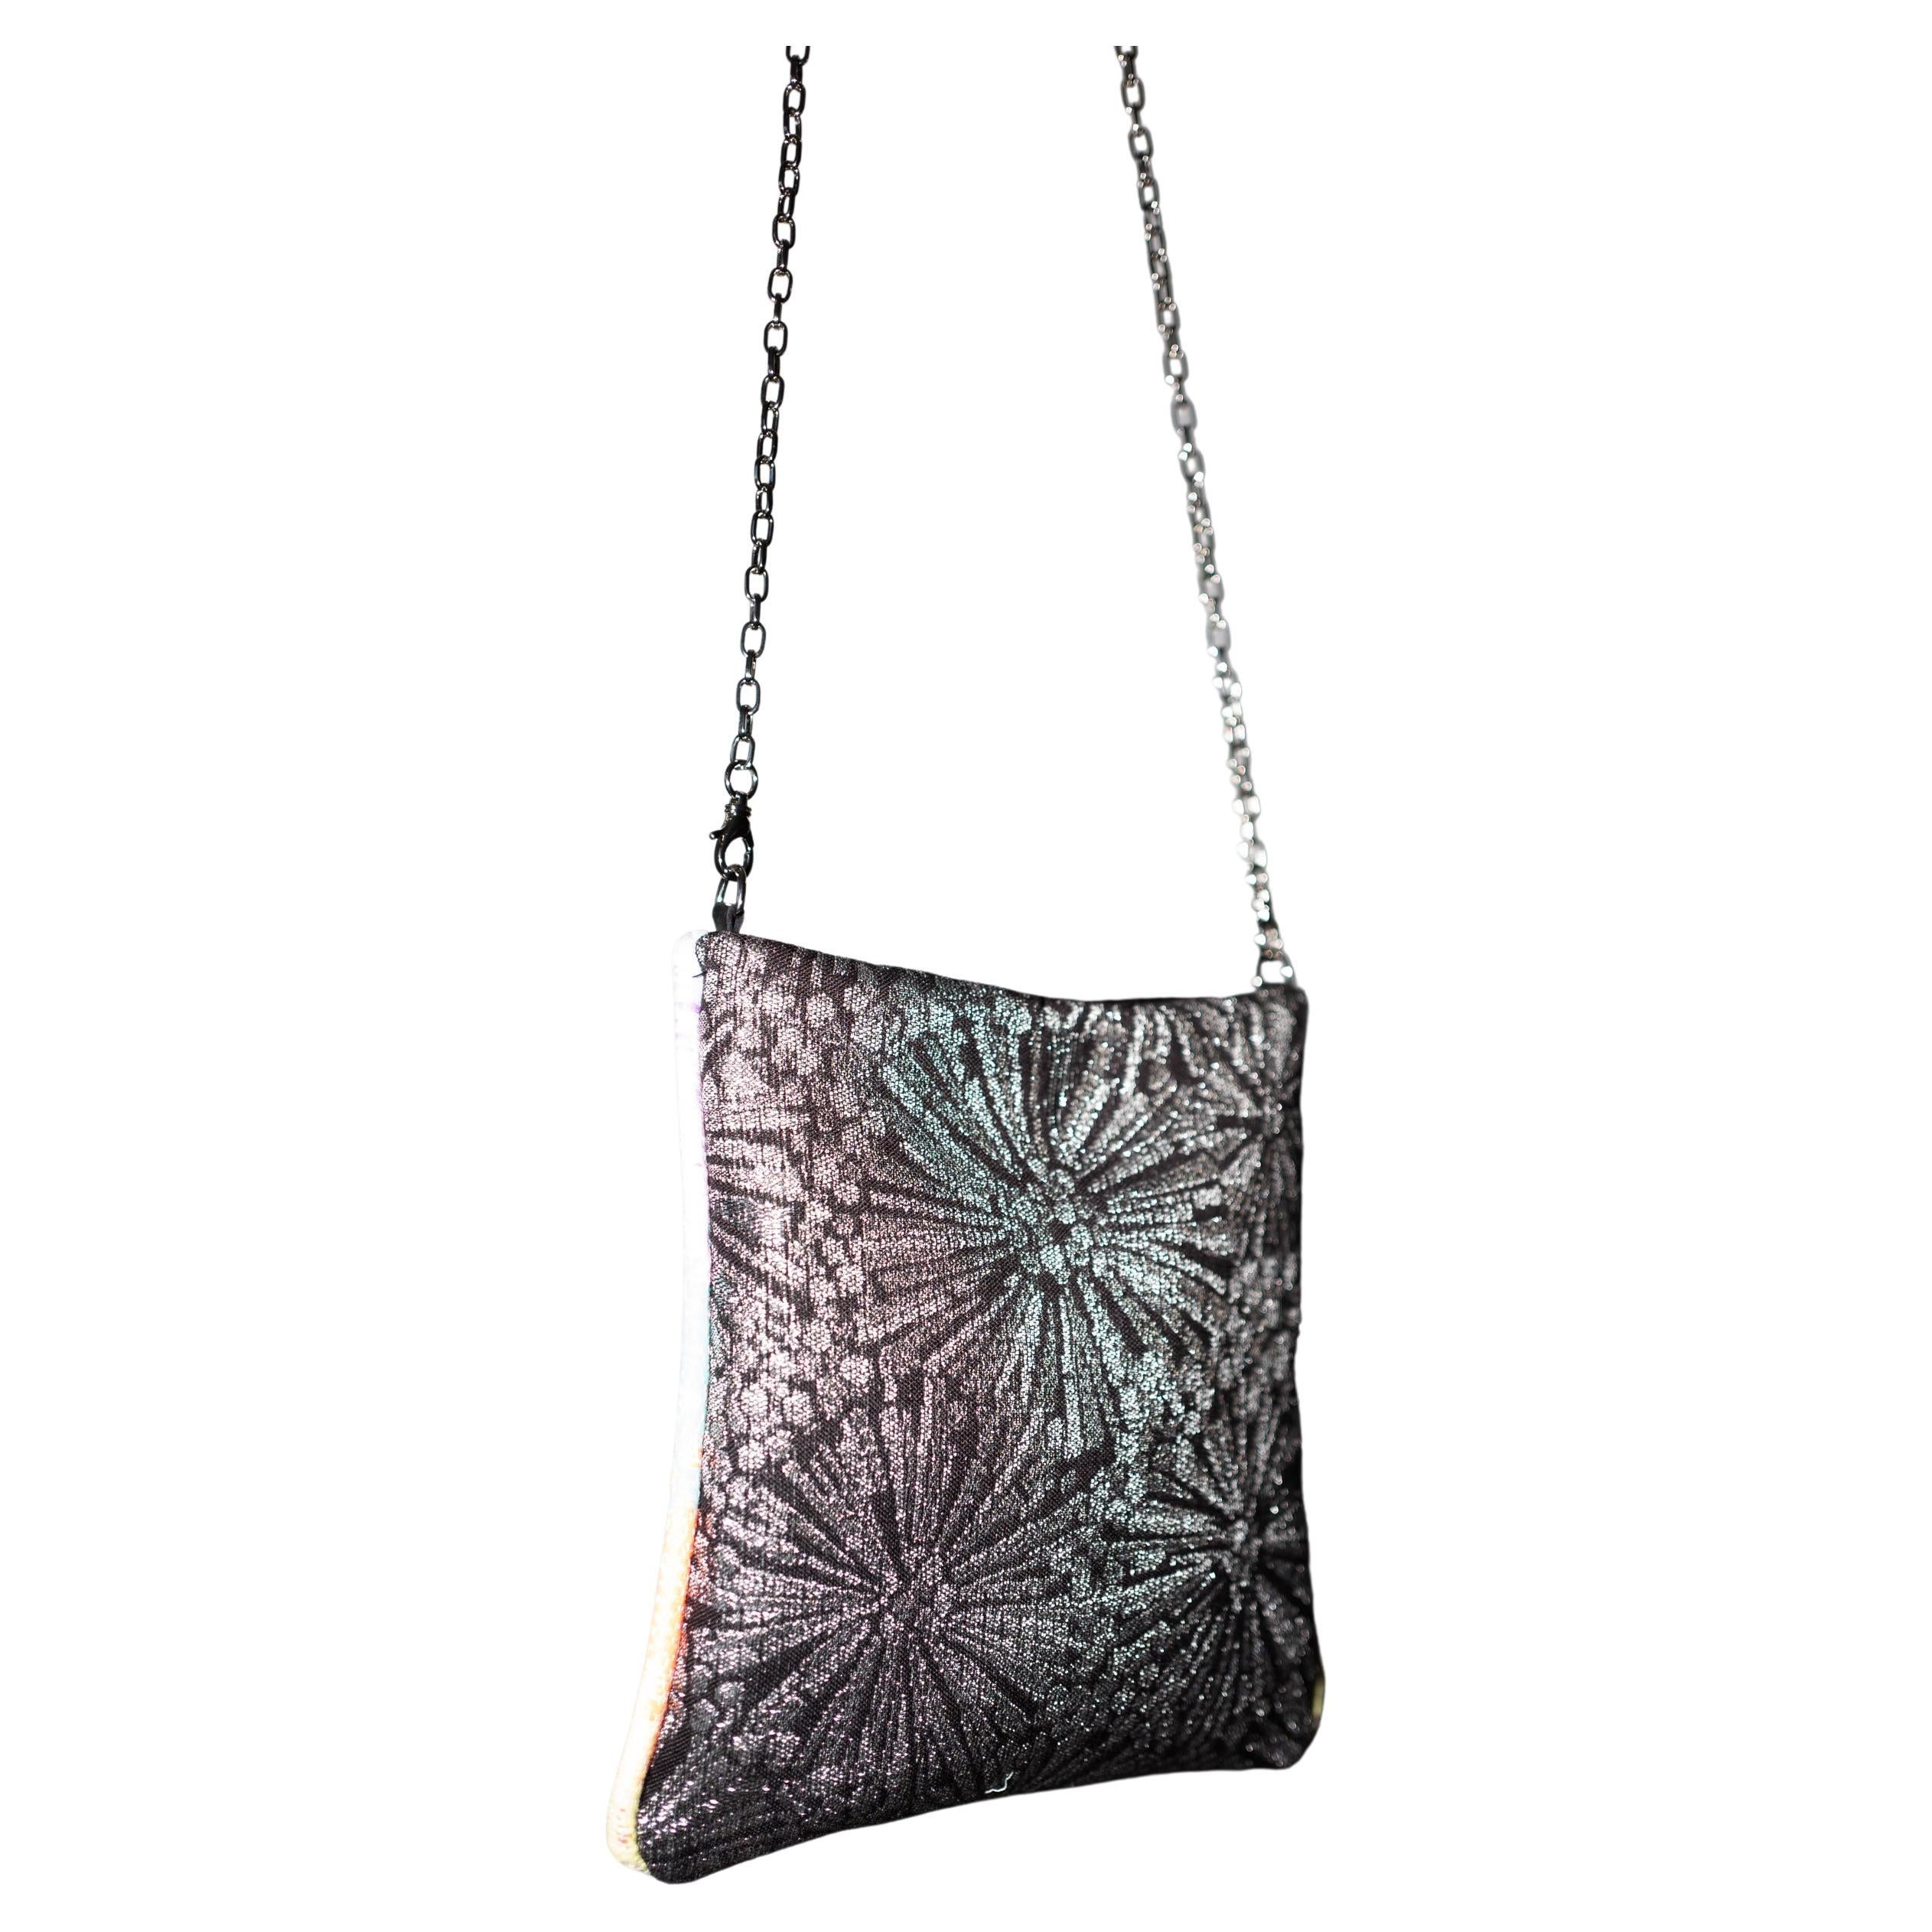 One of a kind Evening Shoulder Italian Palladium Plated Brass Chain Bag with Lurex Black Fabric on one side and  Italian Napa Leather on the other side and a Pastel Rainbow Trim J Dauphin

Size: Height 21 cm, Width 17 cm, Length of Chain including